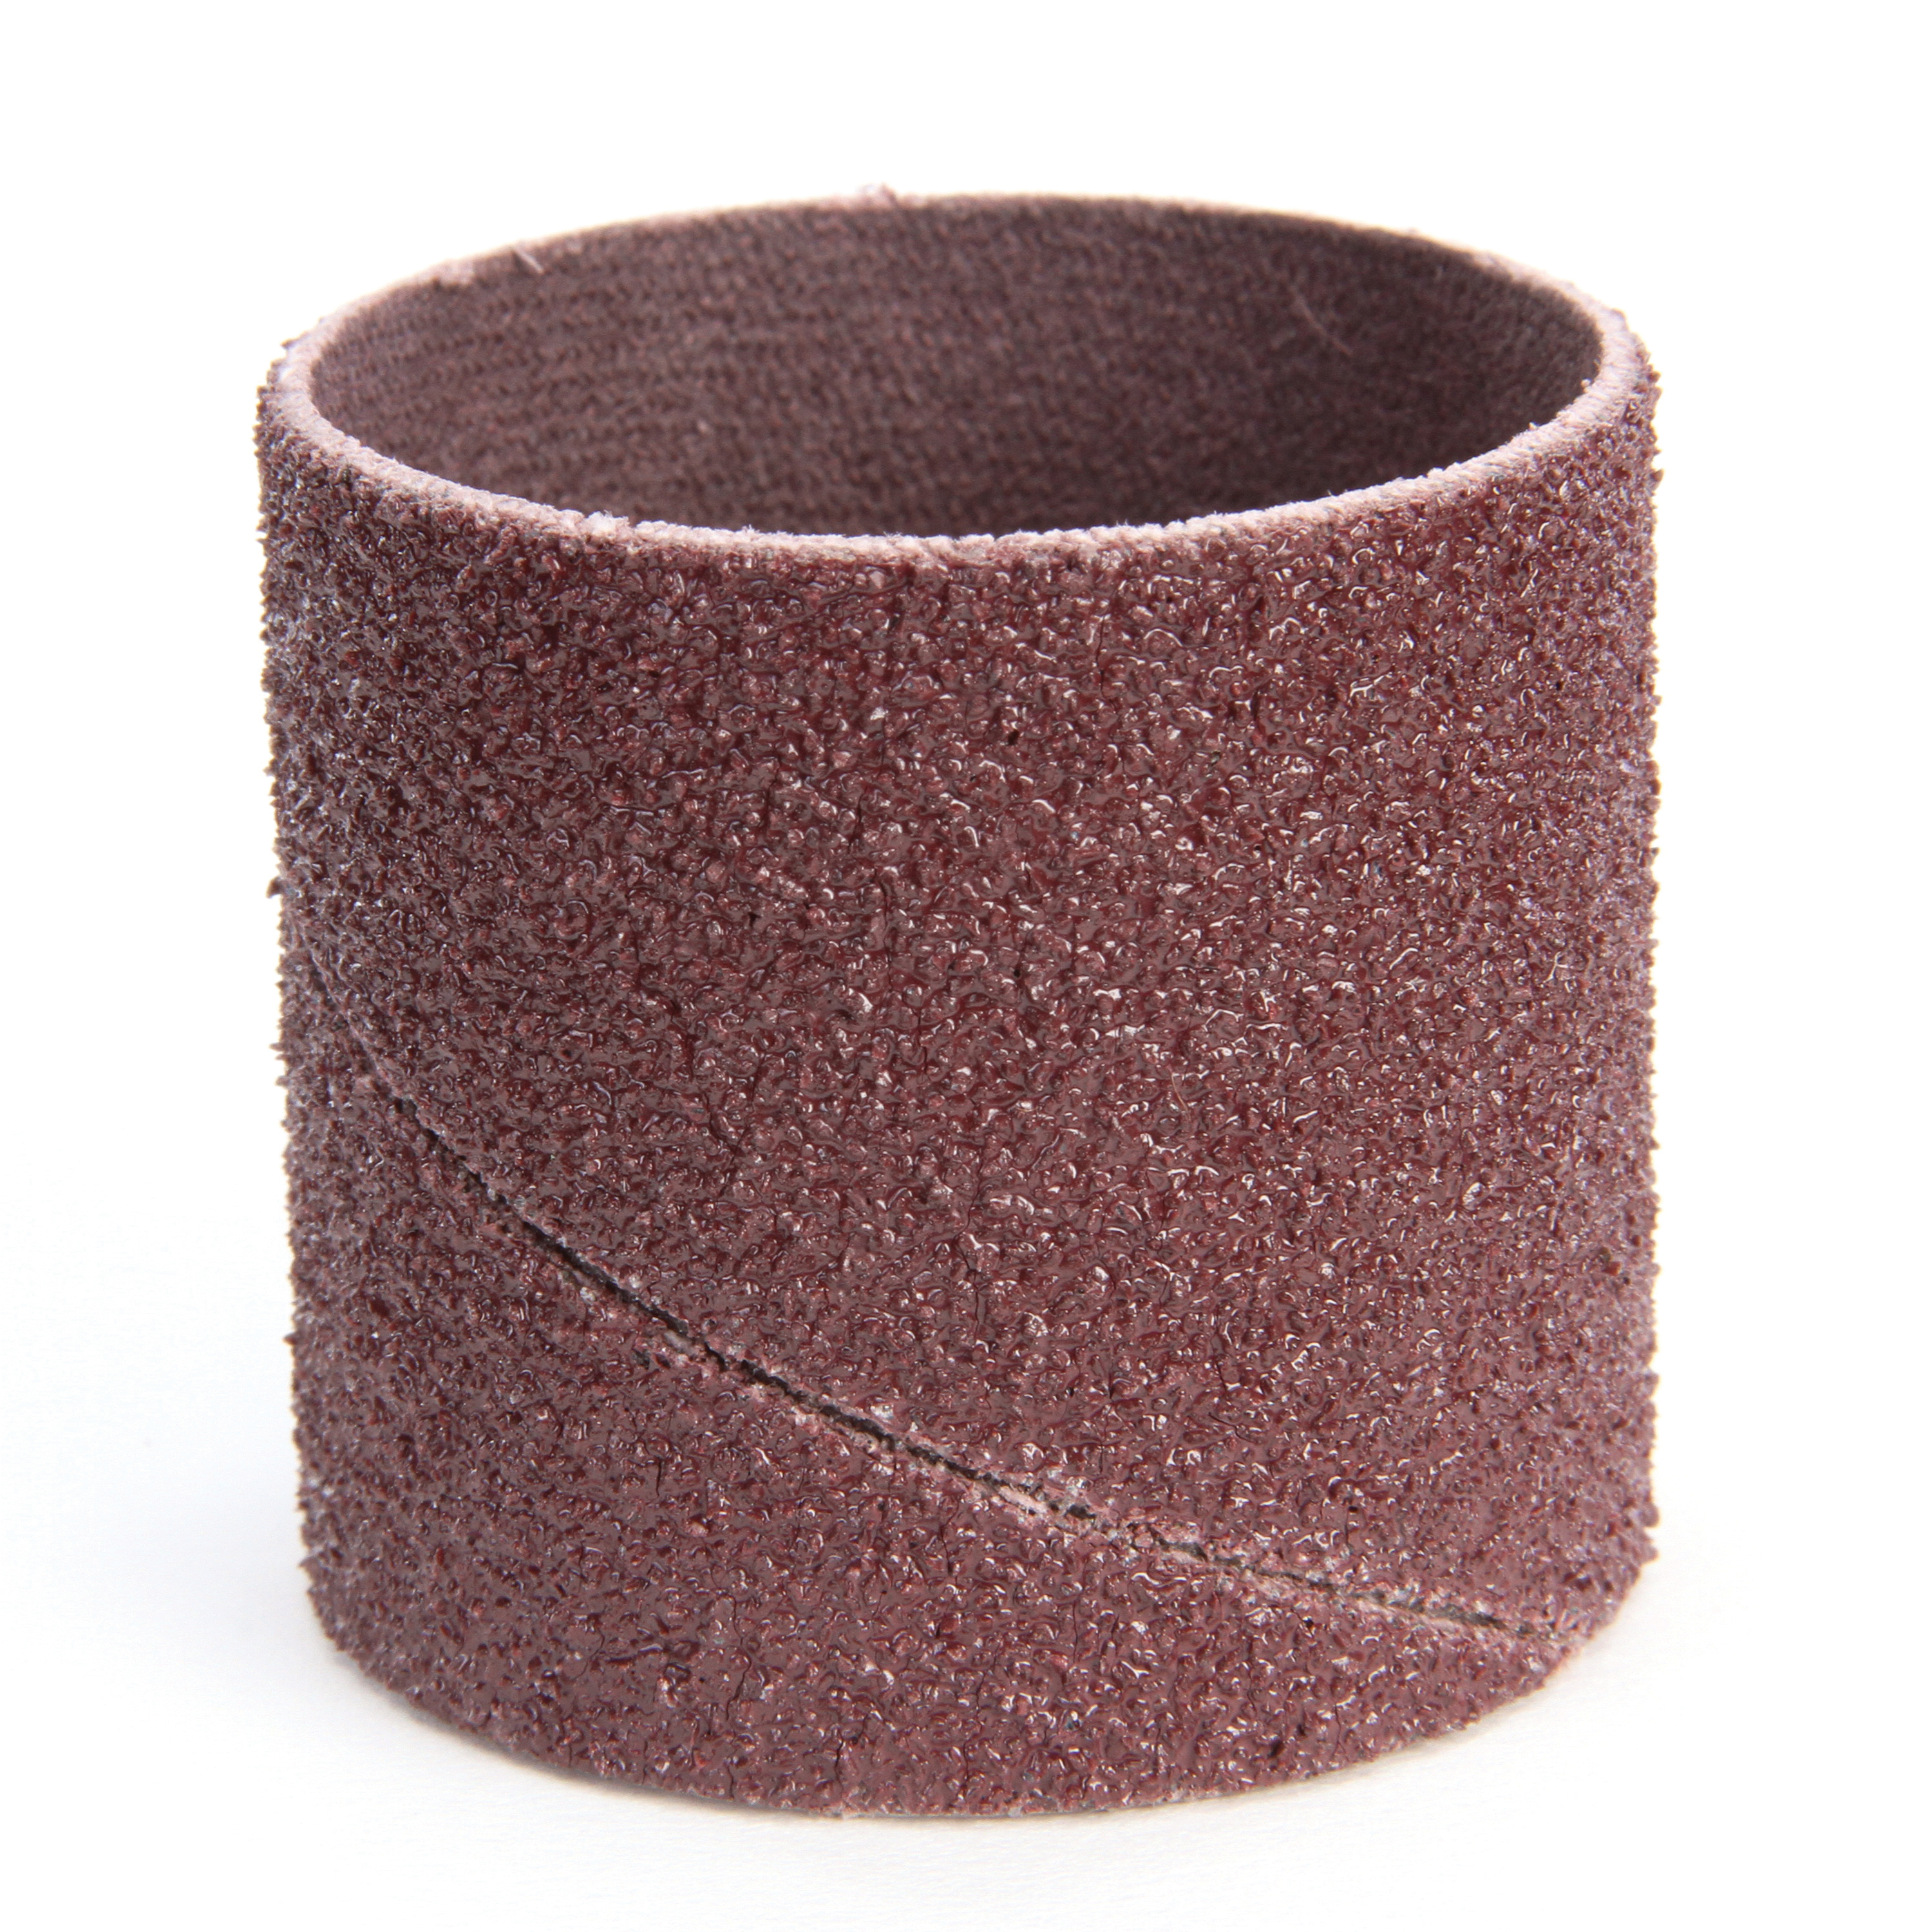 3M™ 051144-11984 341D Coated Band, 1-1/2 in Dia x 1-1/2 in L Band, 50 Grit, Coarse Grade, Aluminum Oxide Abrasive